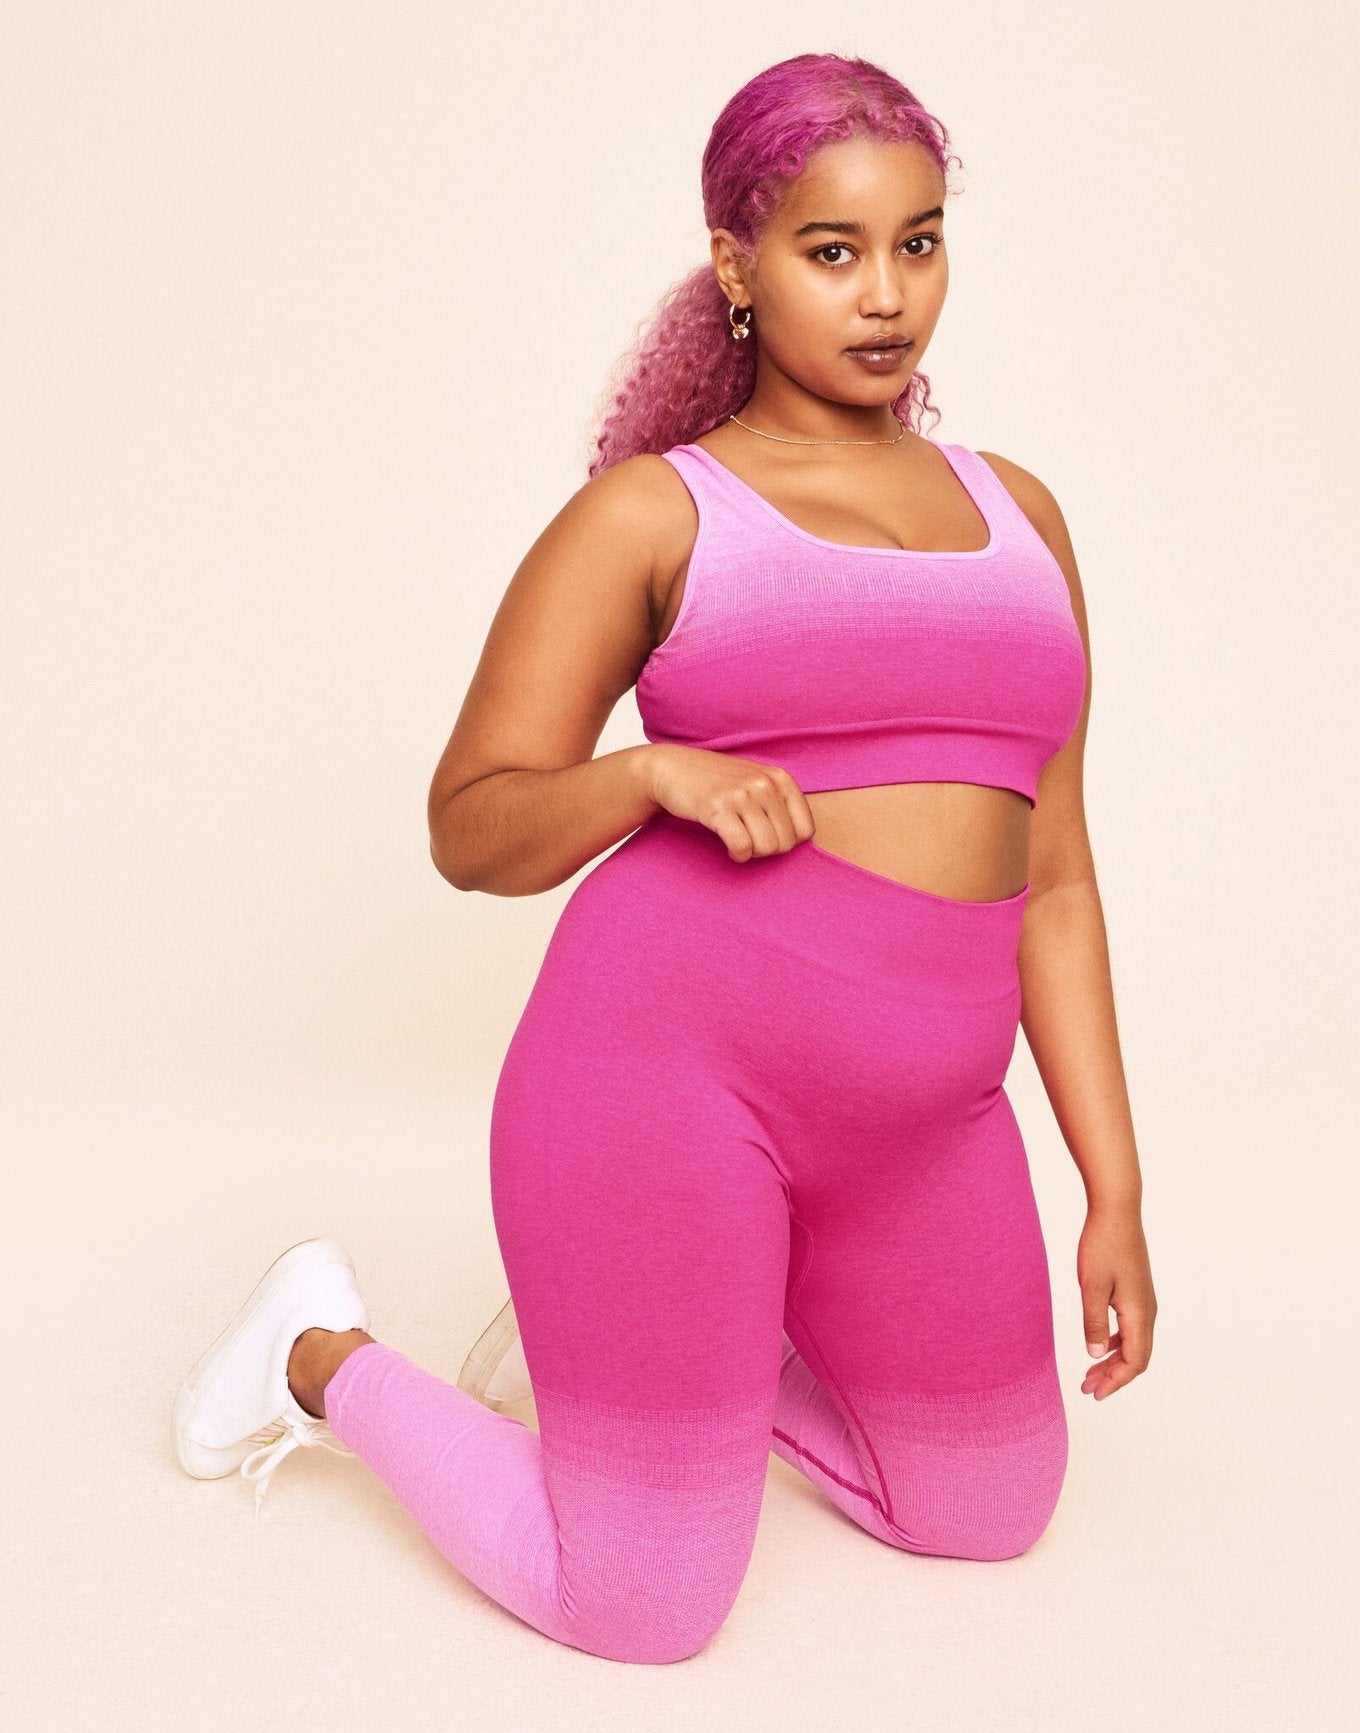 Earth Republic Maeve Ombre Sports Bra Sports Bra in color Solid 03 - Ombre Pink and shape sports bra